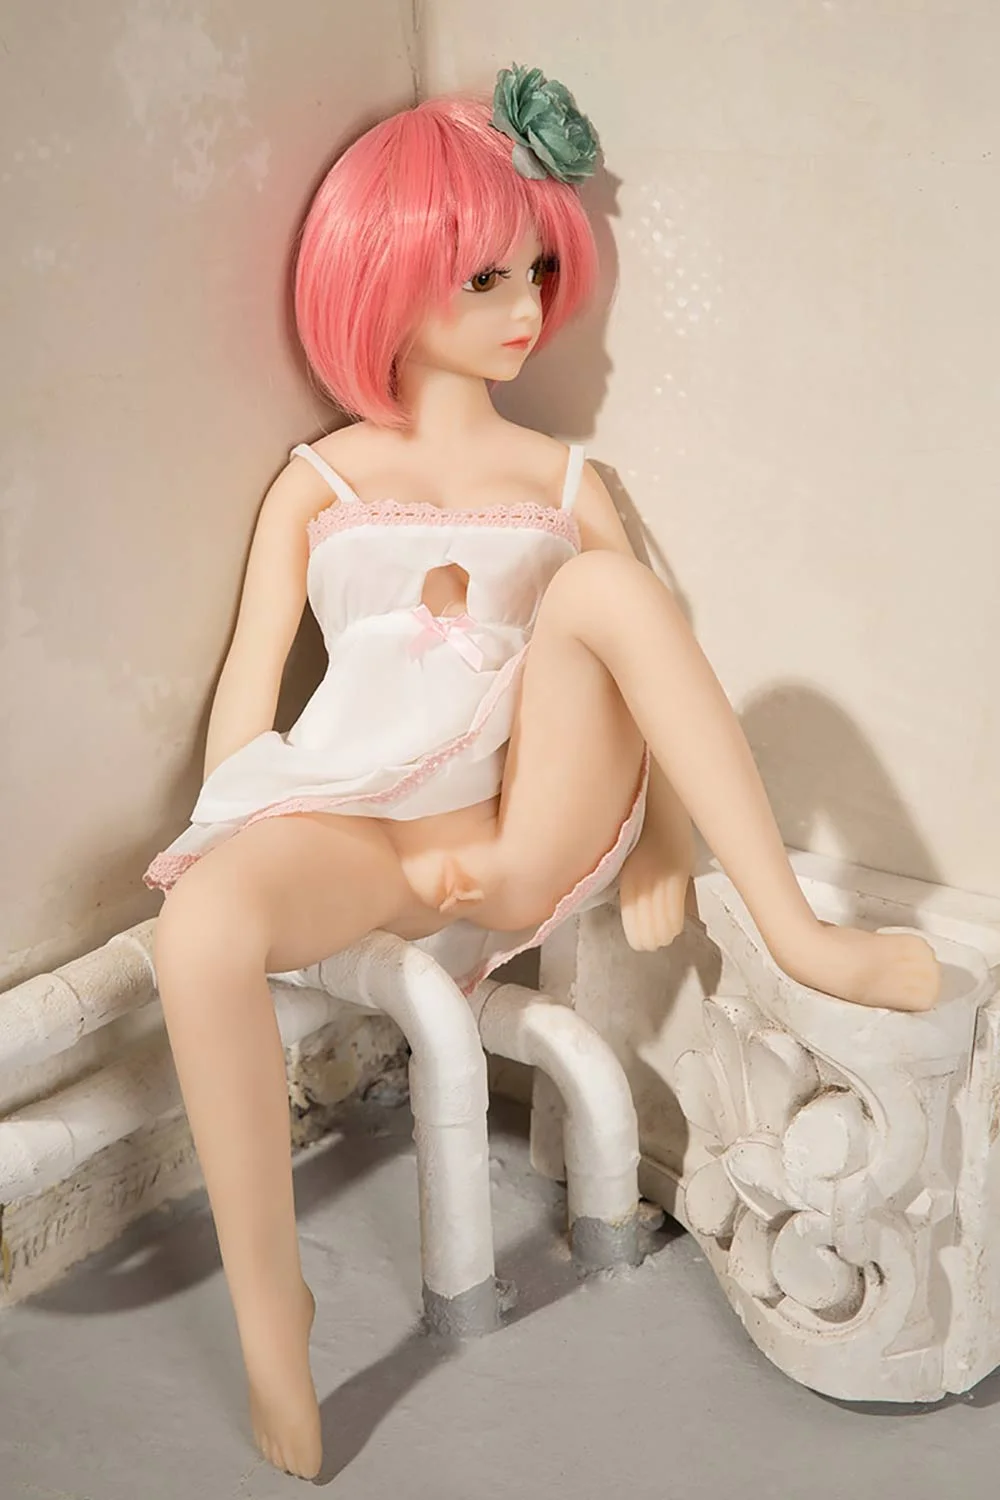 Mini sex doll with short pink hair showing vagina